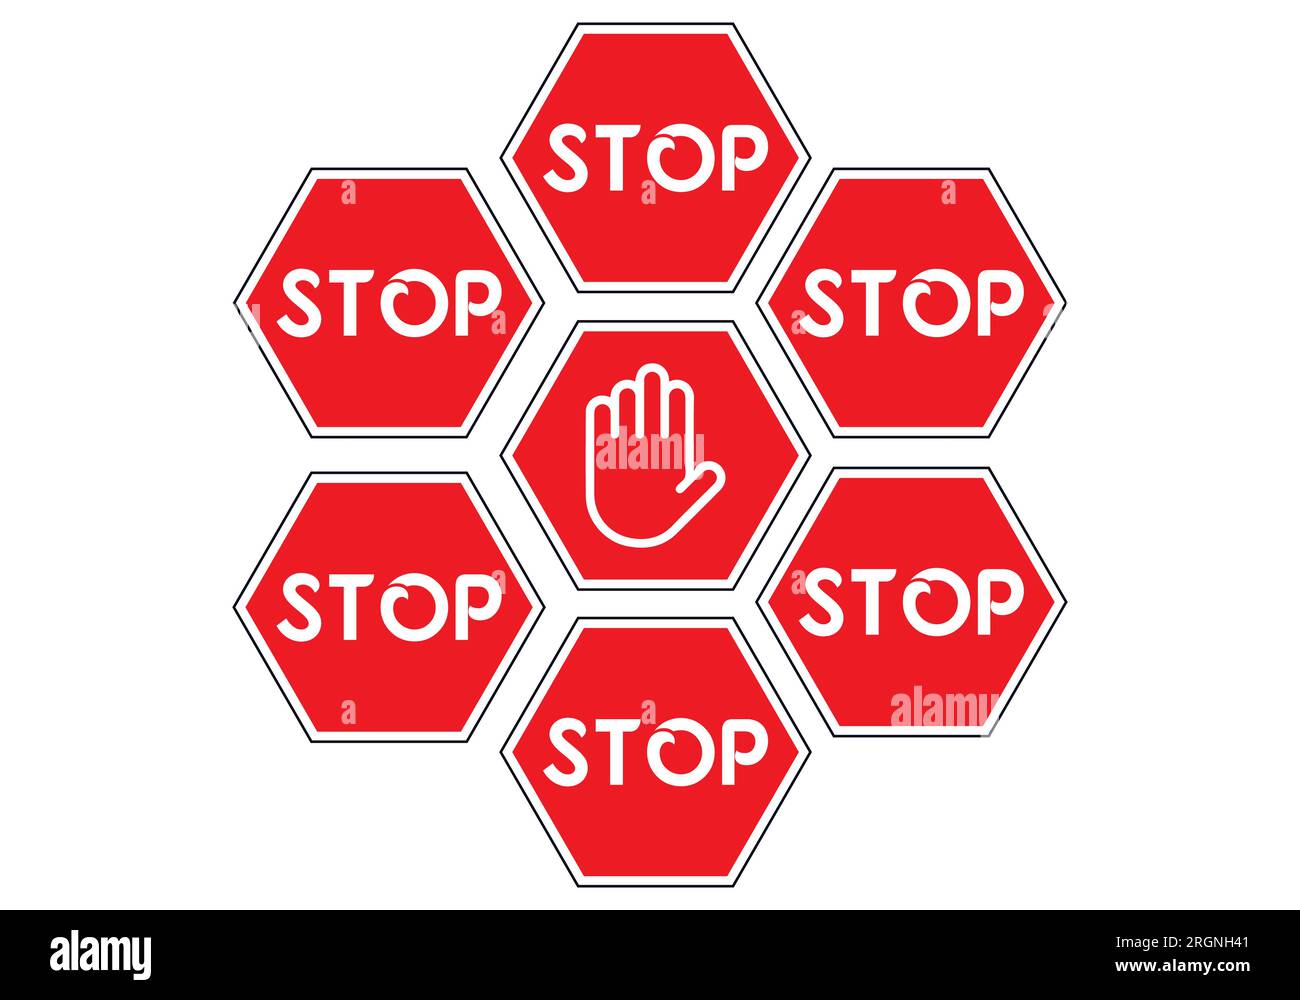 Warning Hand sign icon. Red alert sign symbol. Warning sign red. Stop red sign circle Warning Stock Vector